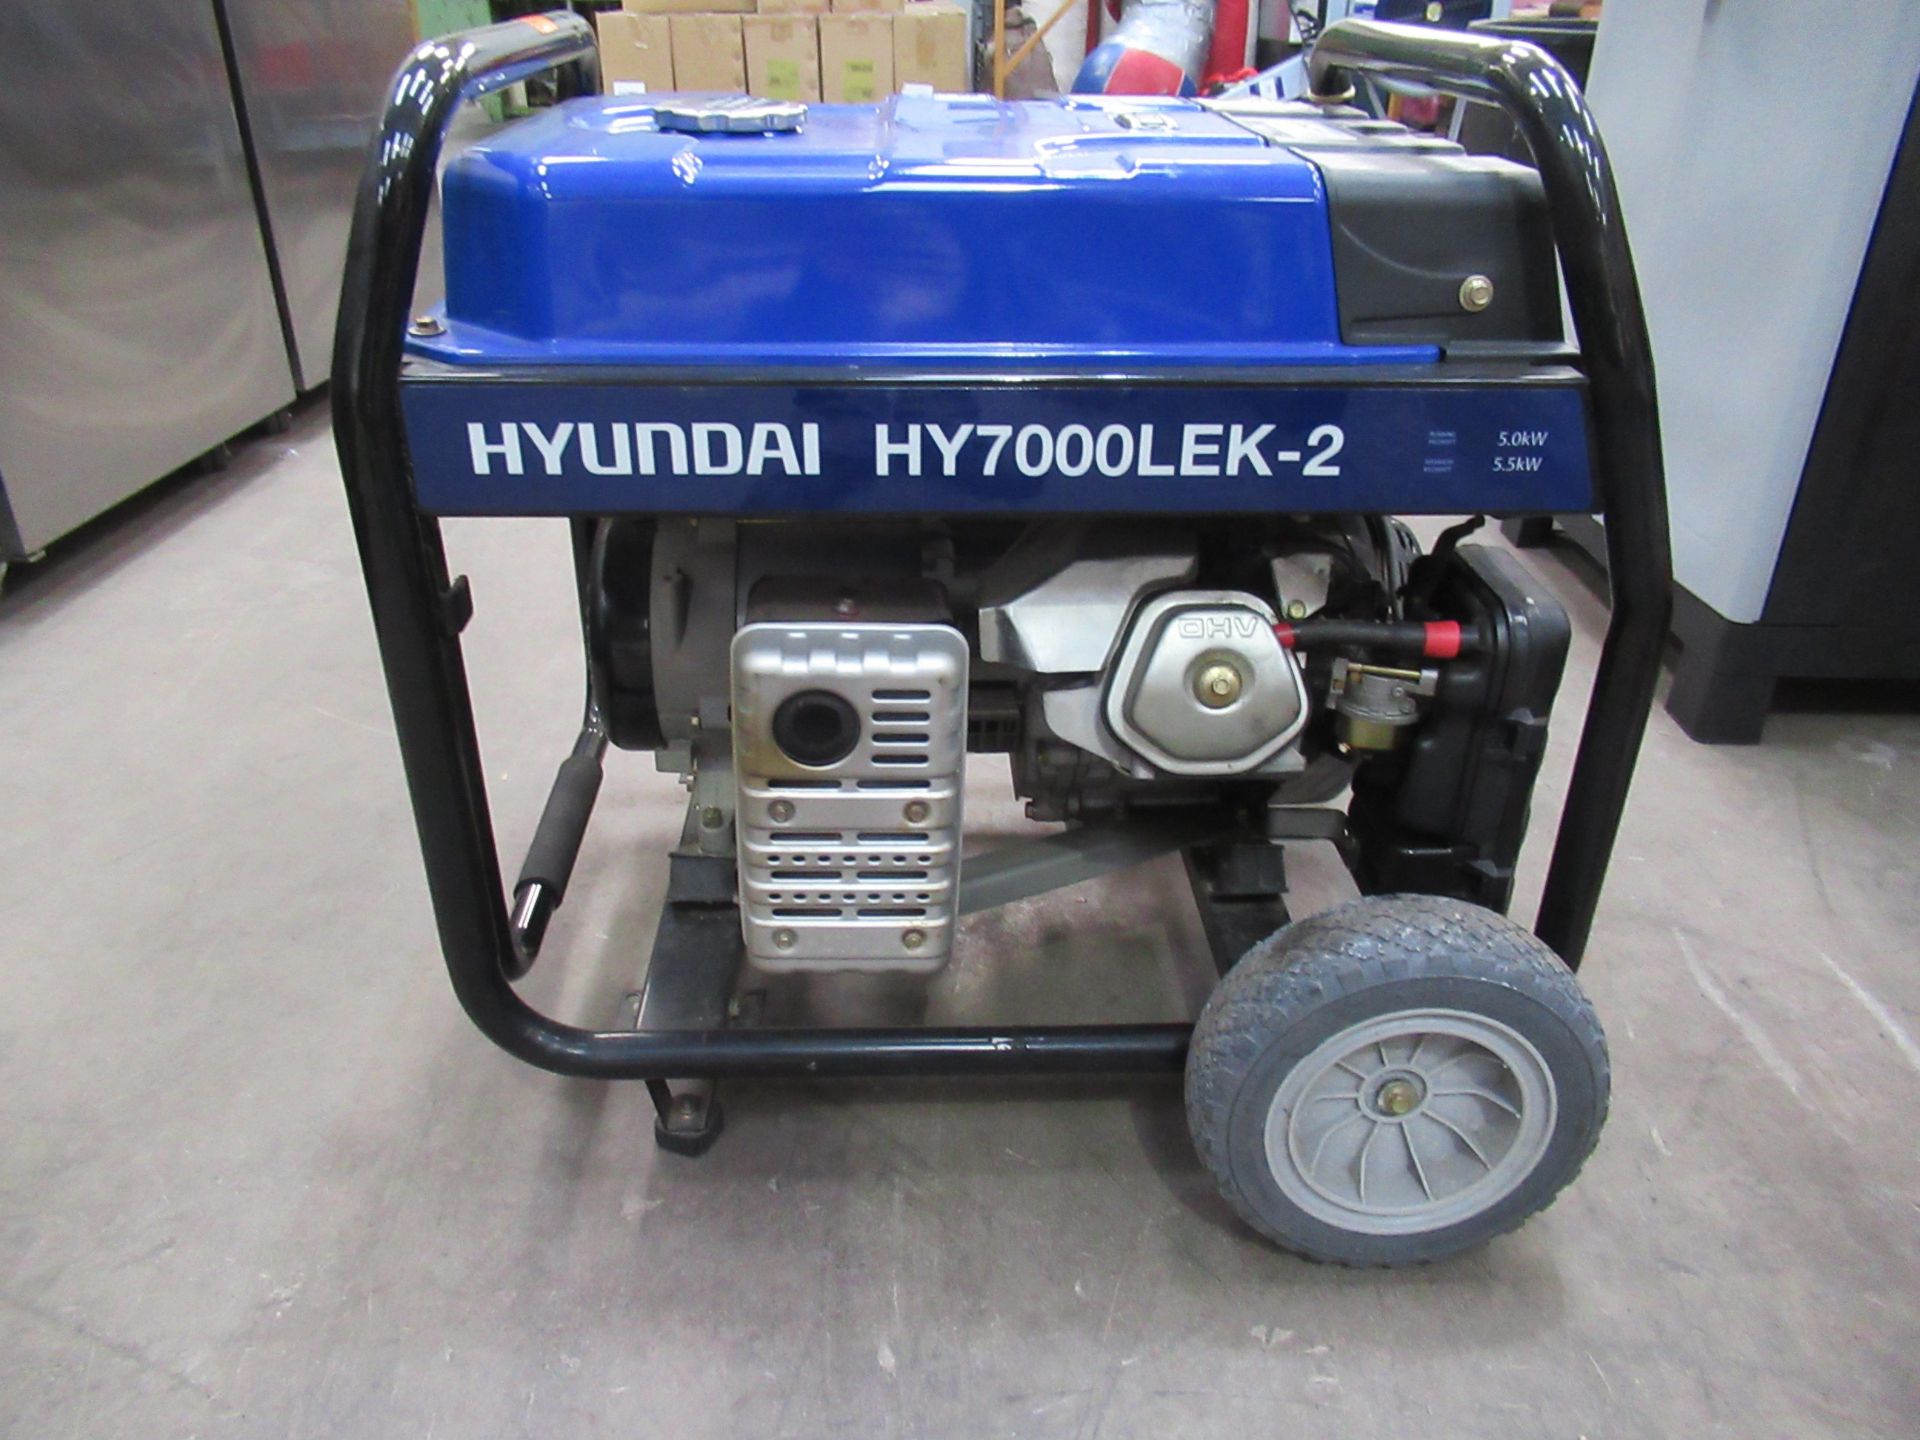 A Hyundai HY7000LEK-2 5.0-5.5Kw 110V and 240V Petrol Generator (Working Condition) - Image 2 of 9